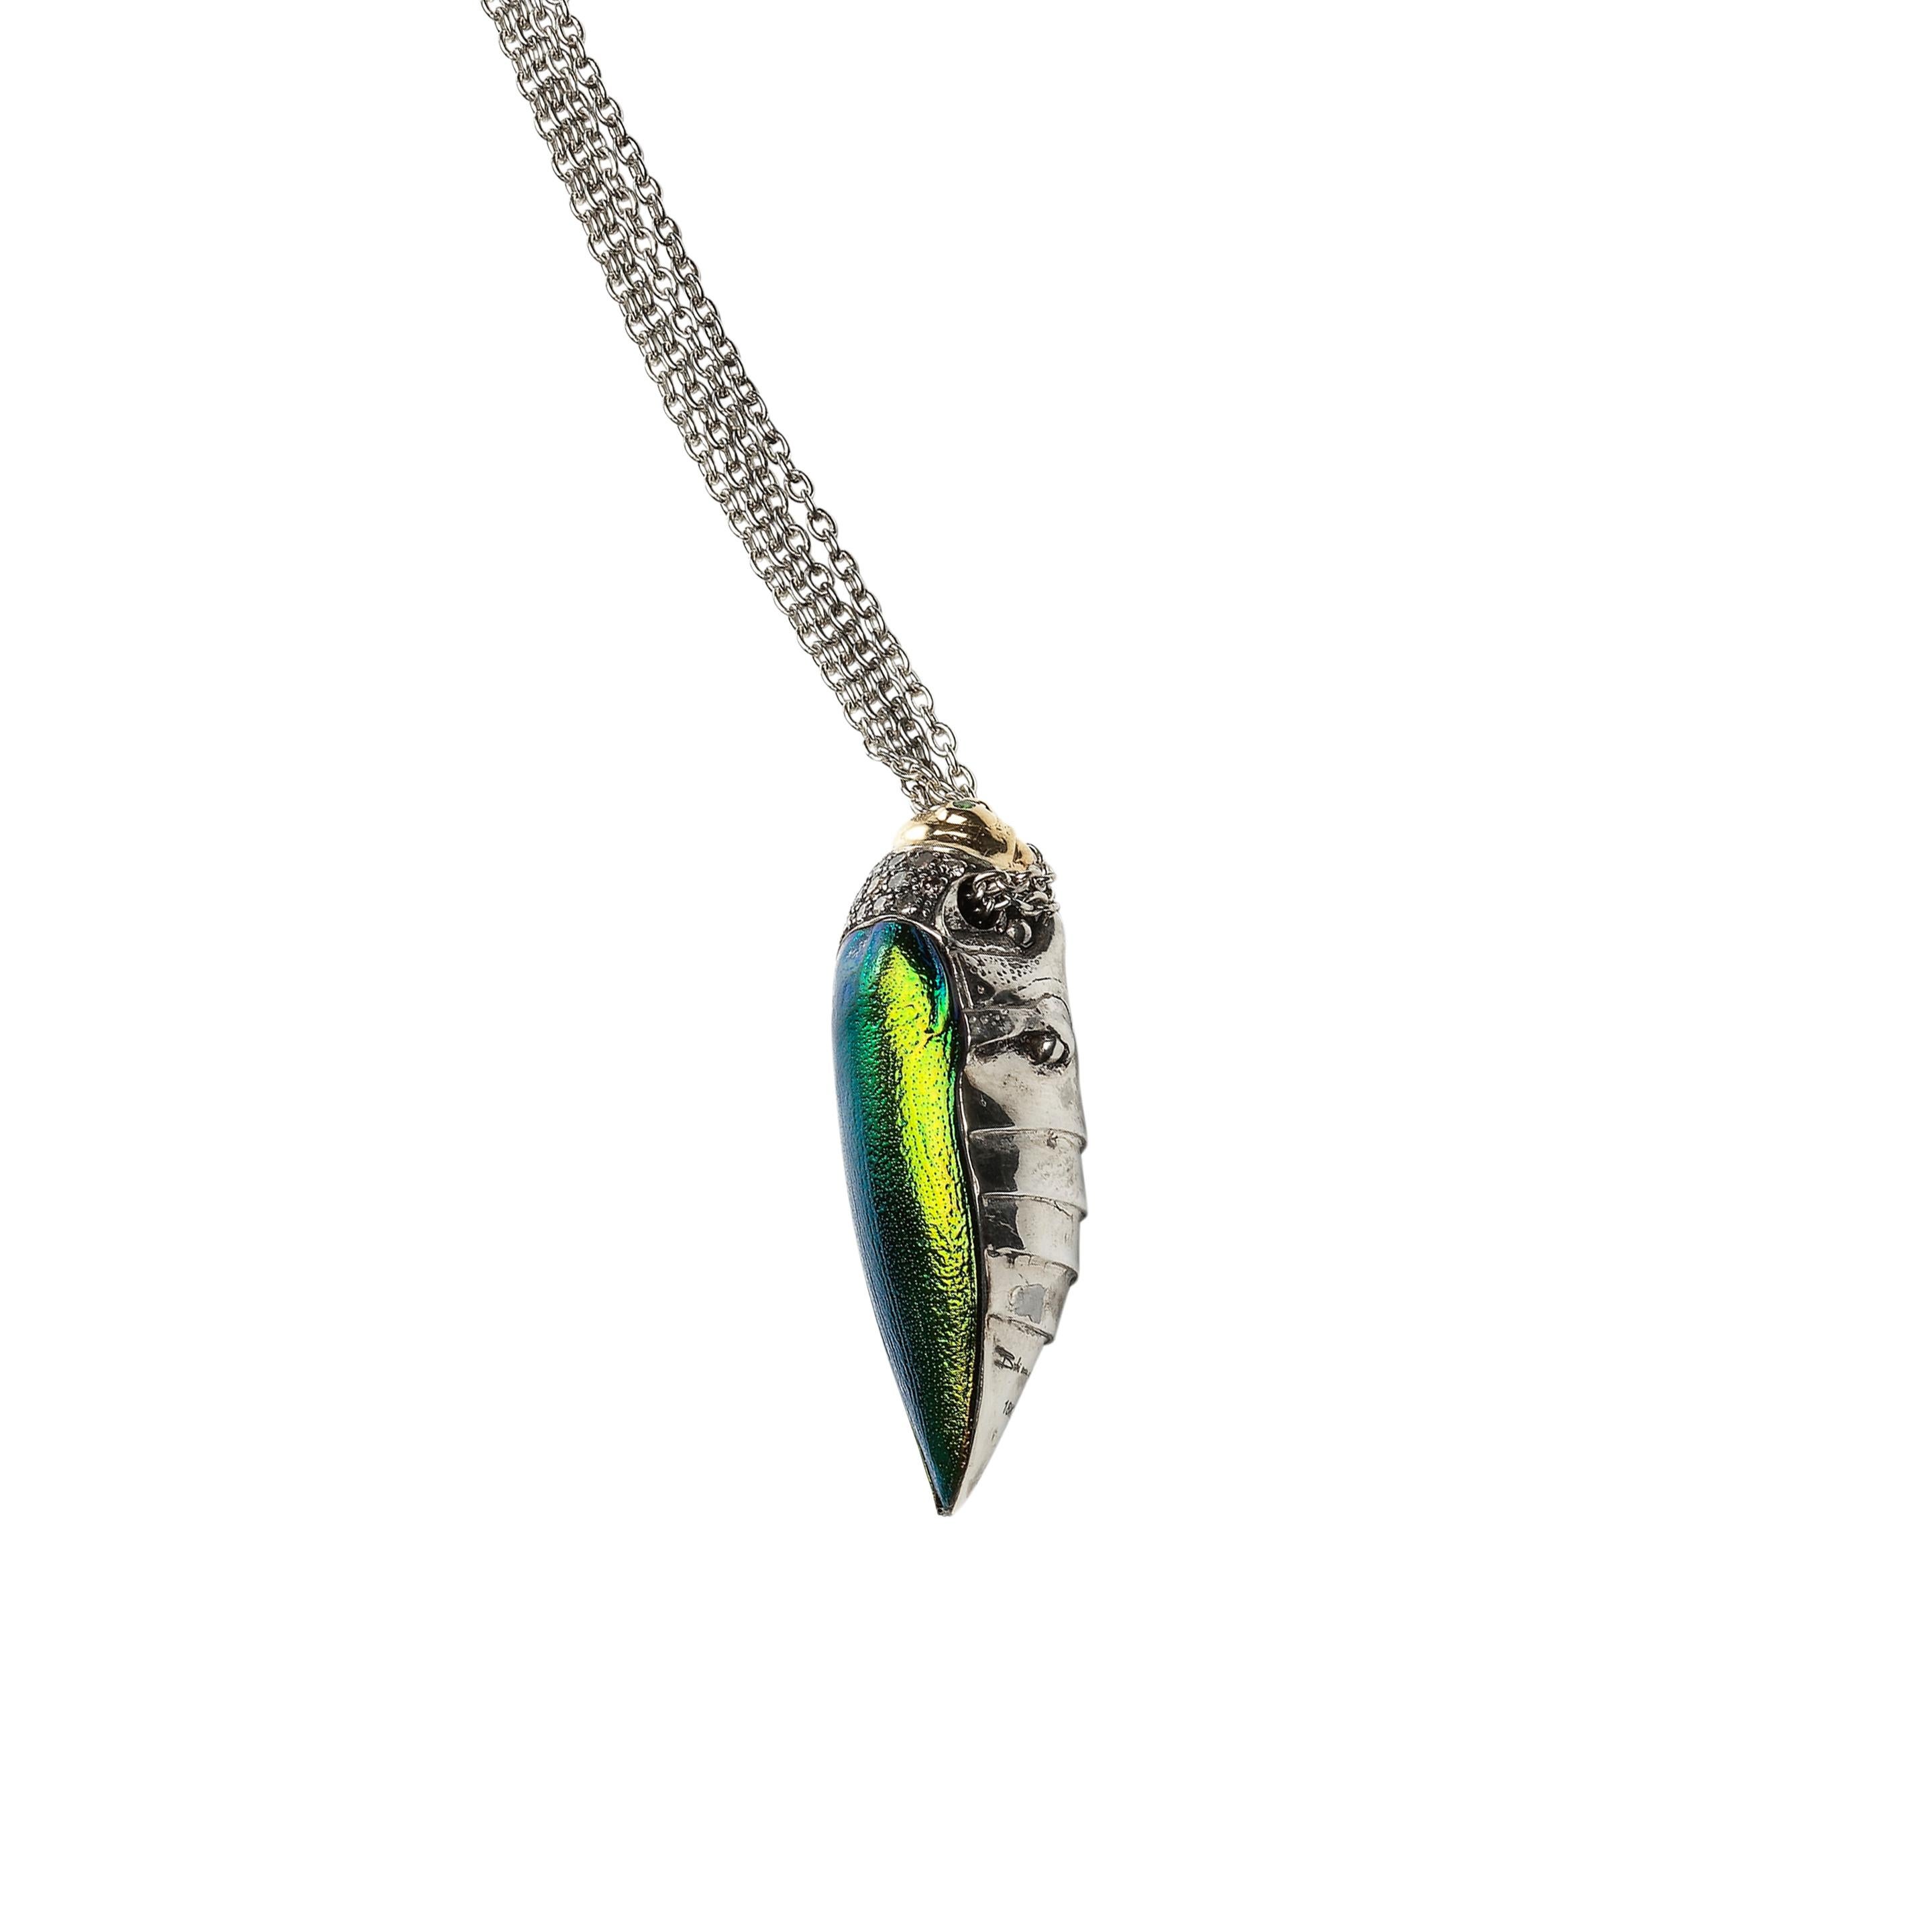 
A single scarab beetle sits on this striking pendant necklace. Designed with a sterling silver body and 18k yellow gold head, the beetle is embellished with brown diamonds and a real scarab wing in iridescent tones of green and yellow.

Materials: